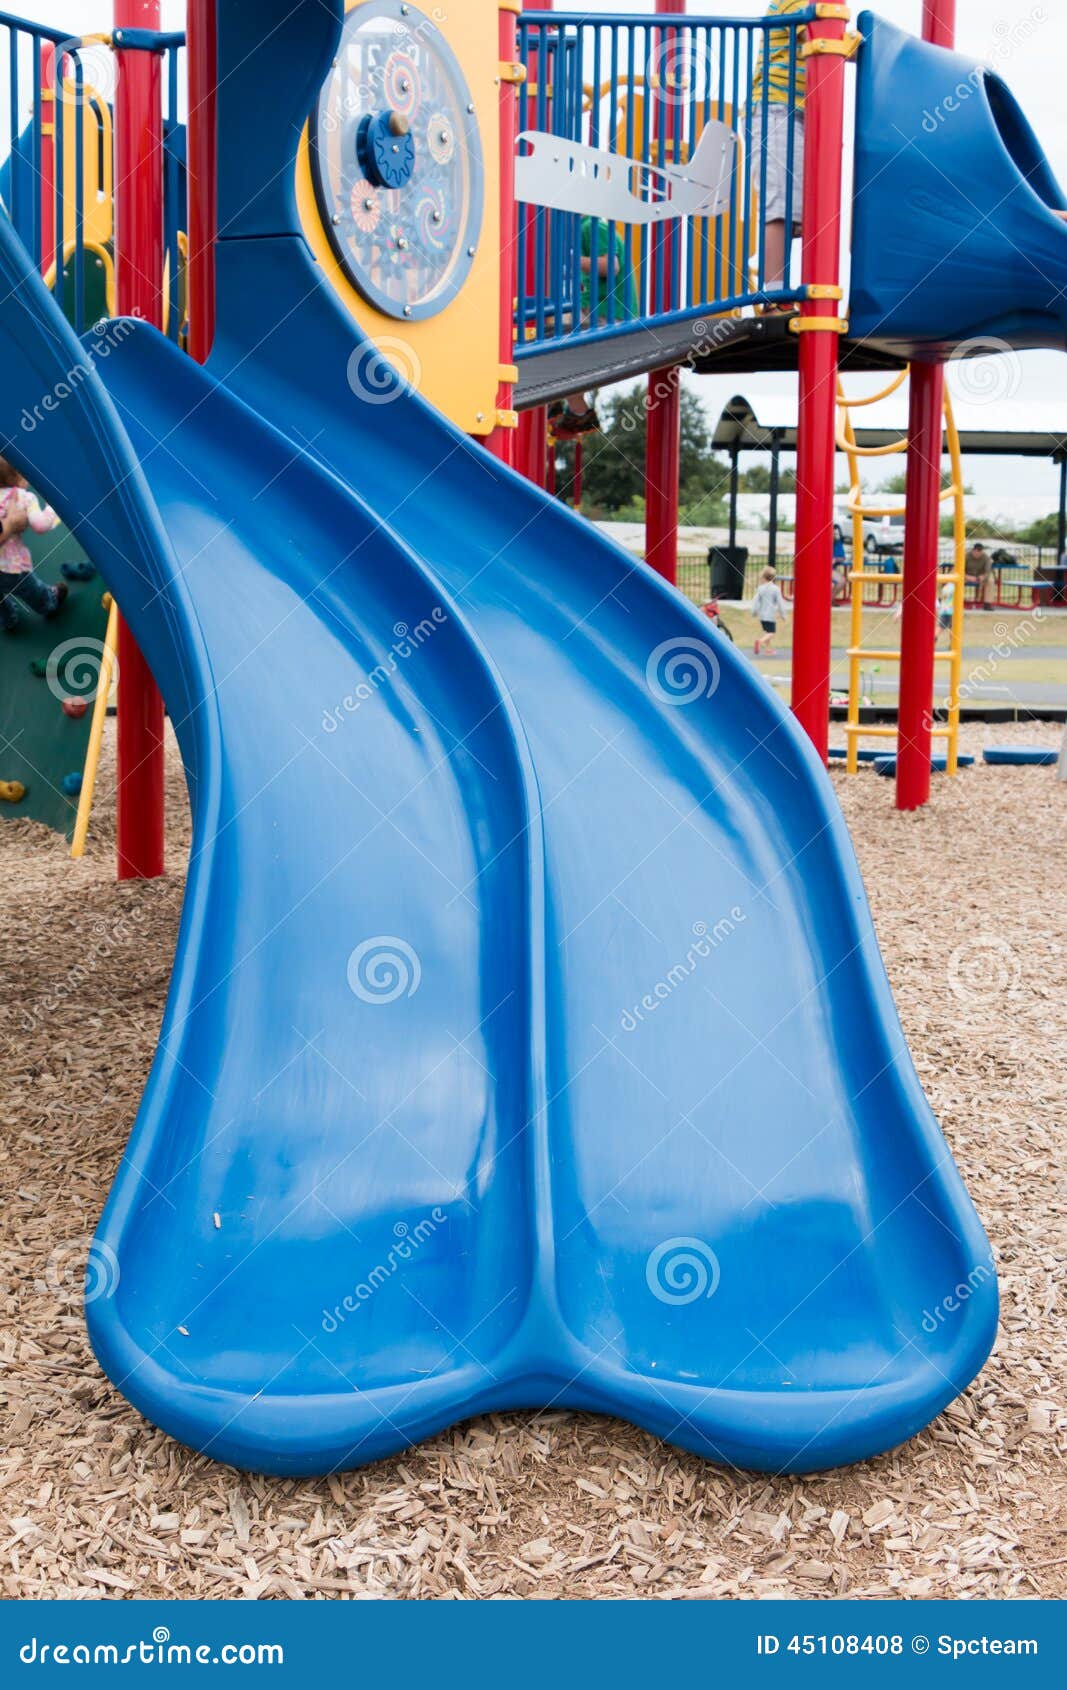 Curved Playground Slide Stock Image. Image Of Carefree - 1868565 8D4